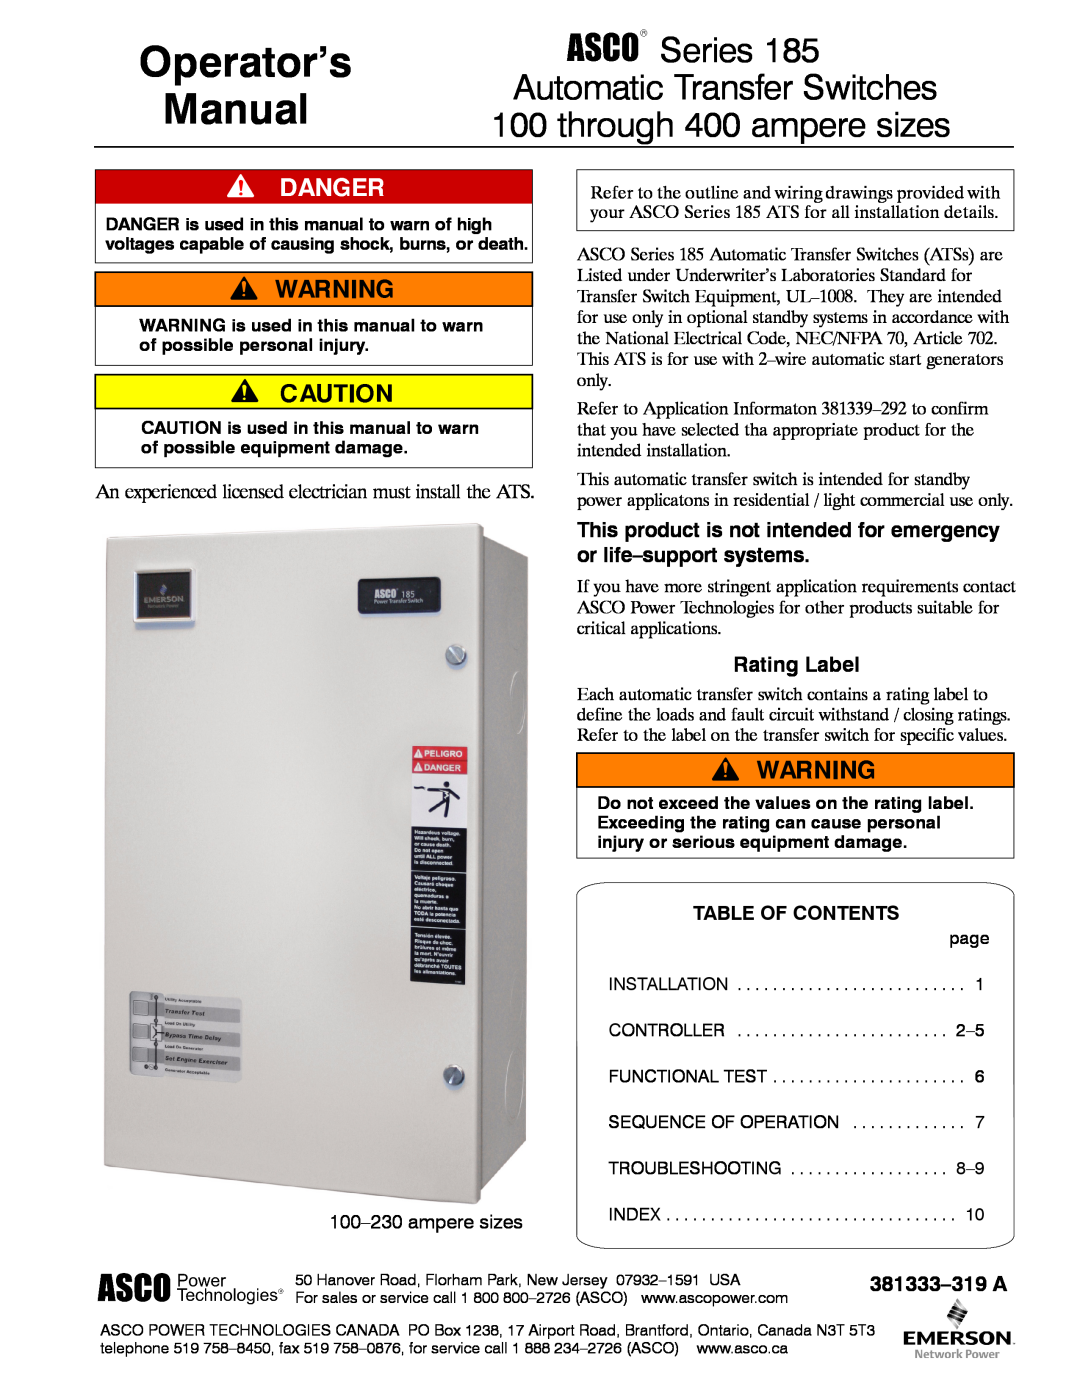 Emerson manual Rating Label, Operator’s Manual, through 400 ampere sizes, Series 185 Automatic Transfer Switches 